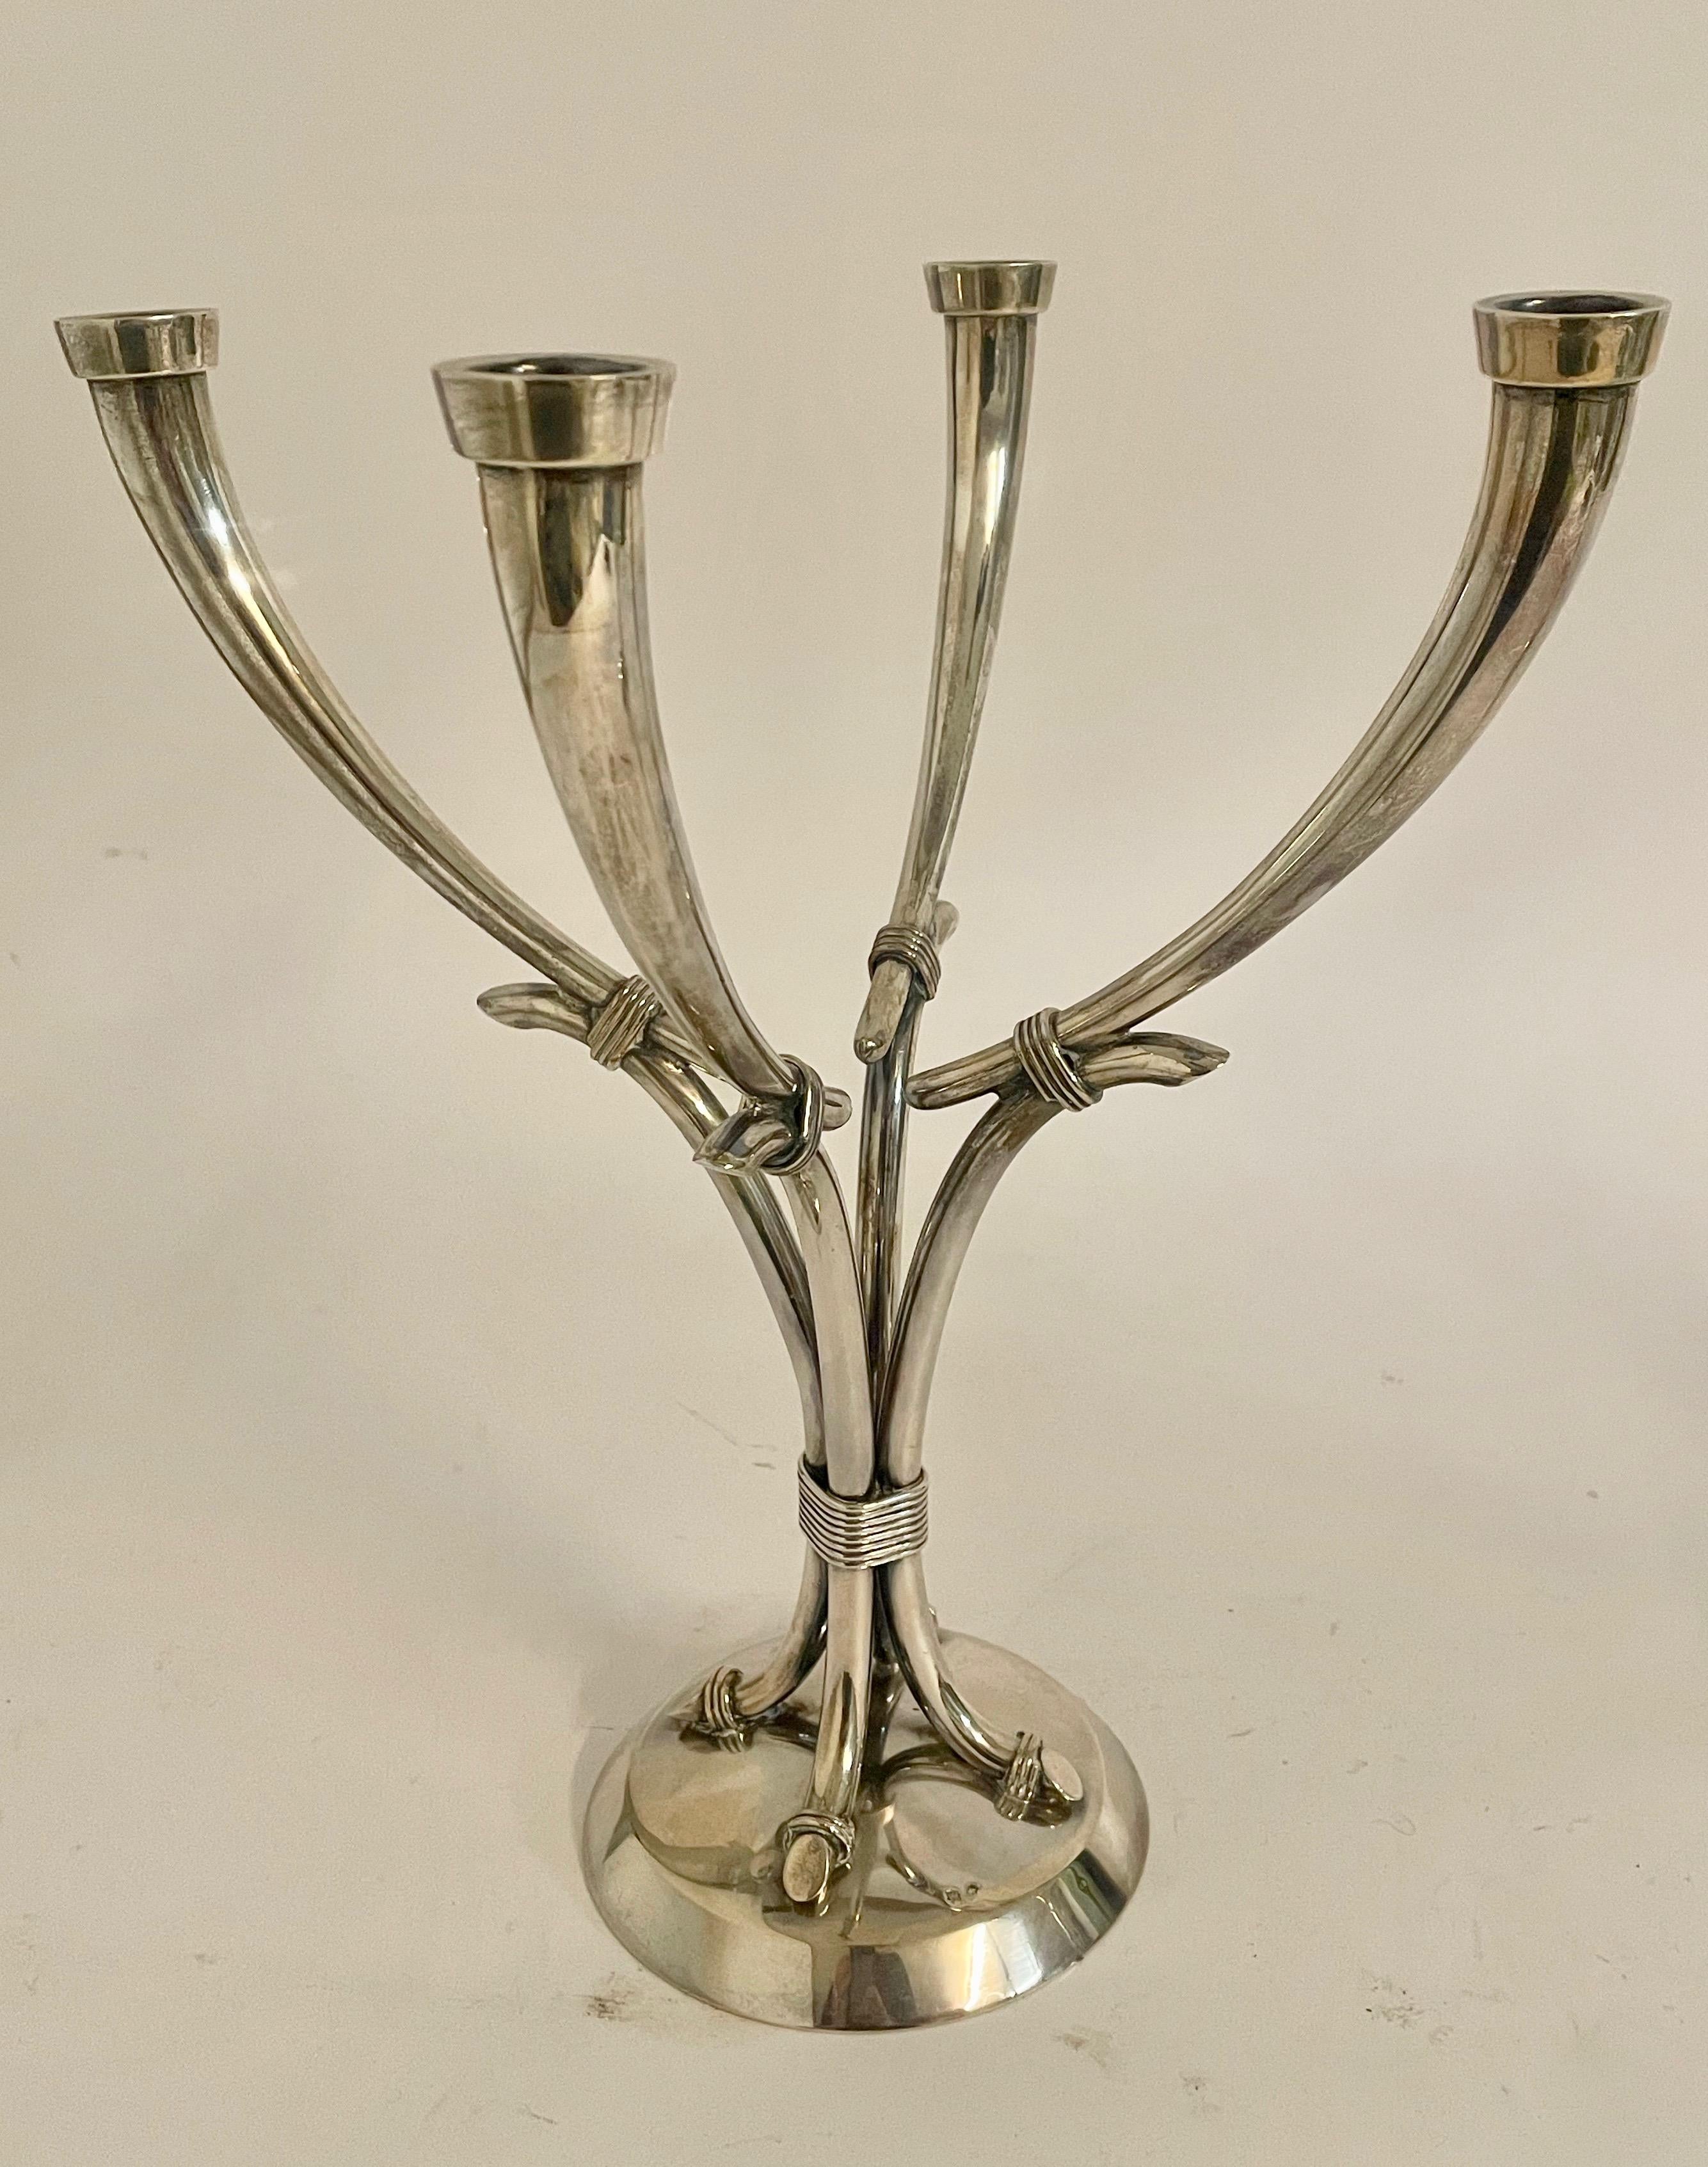 Pair of elegant Spanish silver candelabra with four arms, stamped with a silver mark to the top and 'Rafael Torres' to the base, along with 'Plata De Ley' (meaning sterling silver) and the initial M to the underside. This pair of 1980s modernist